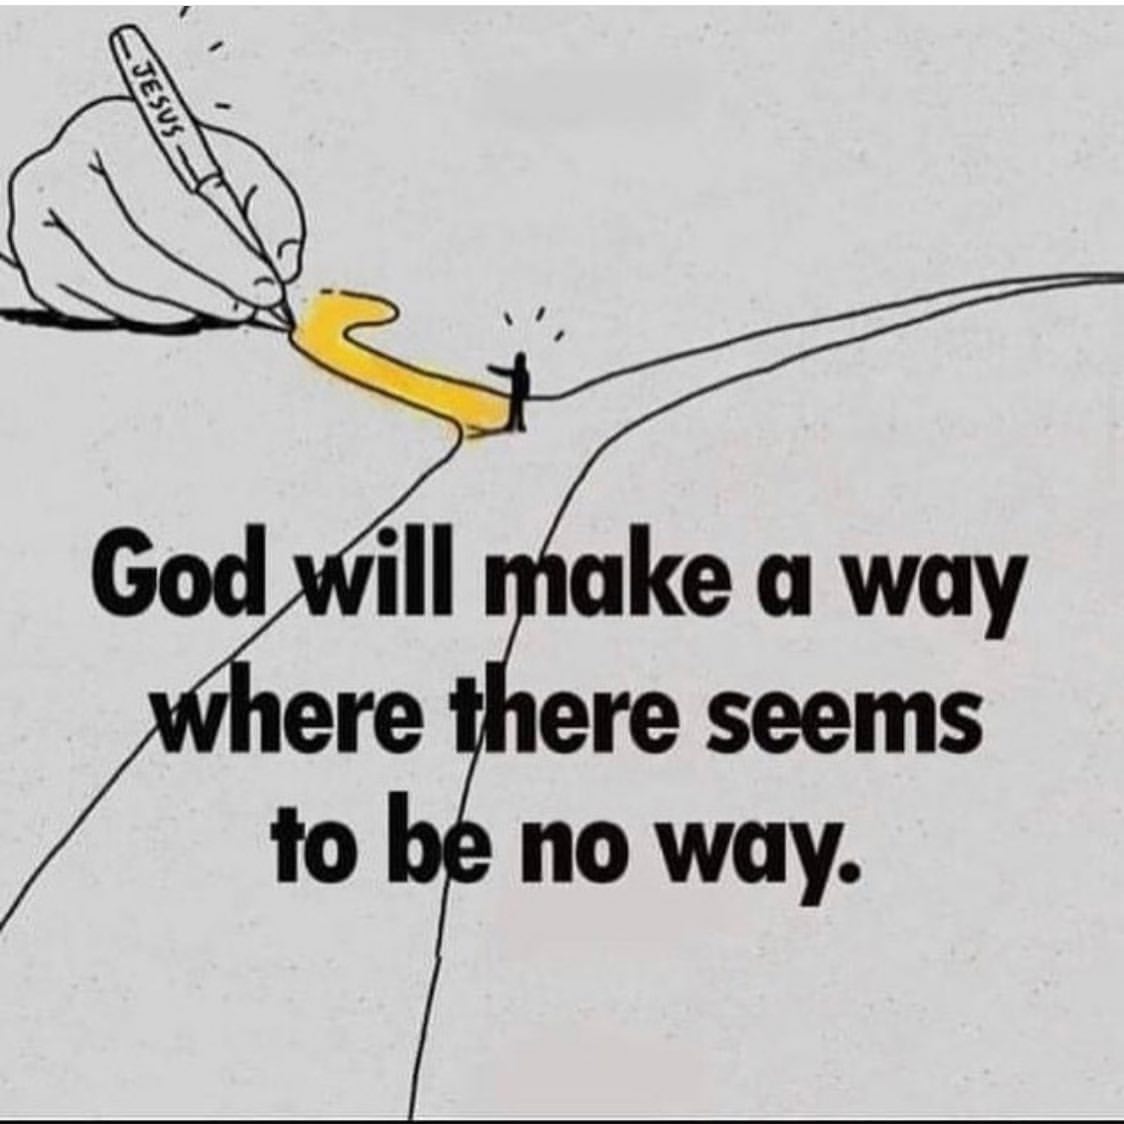 God will make a way where there seems to be no way.